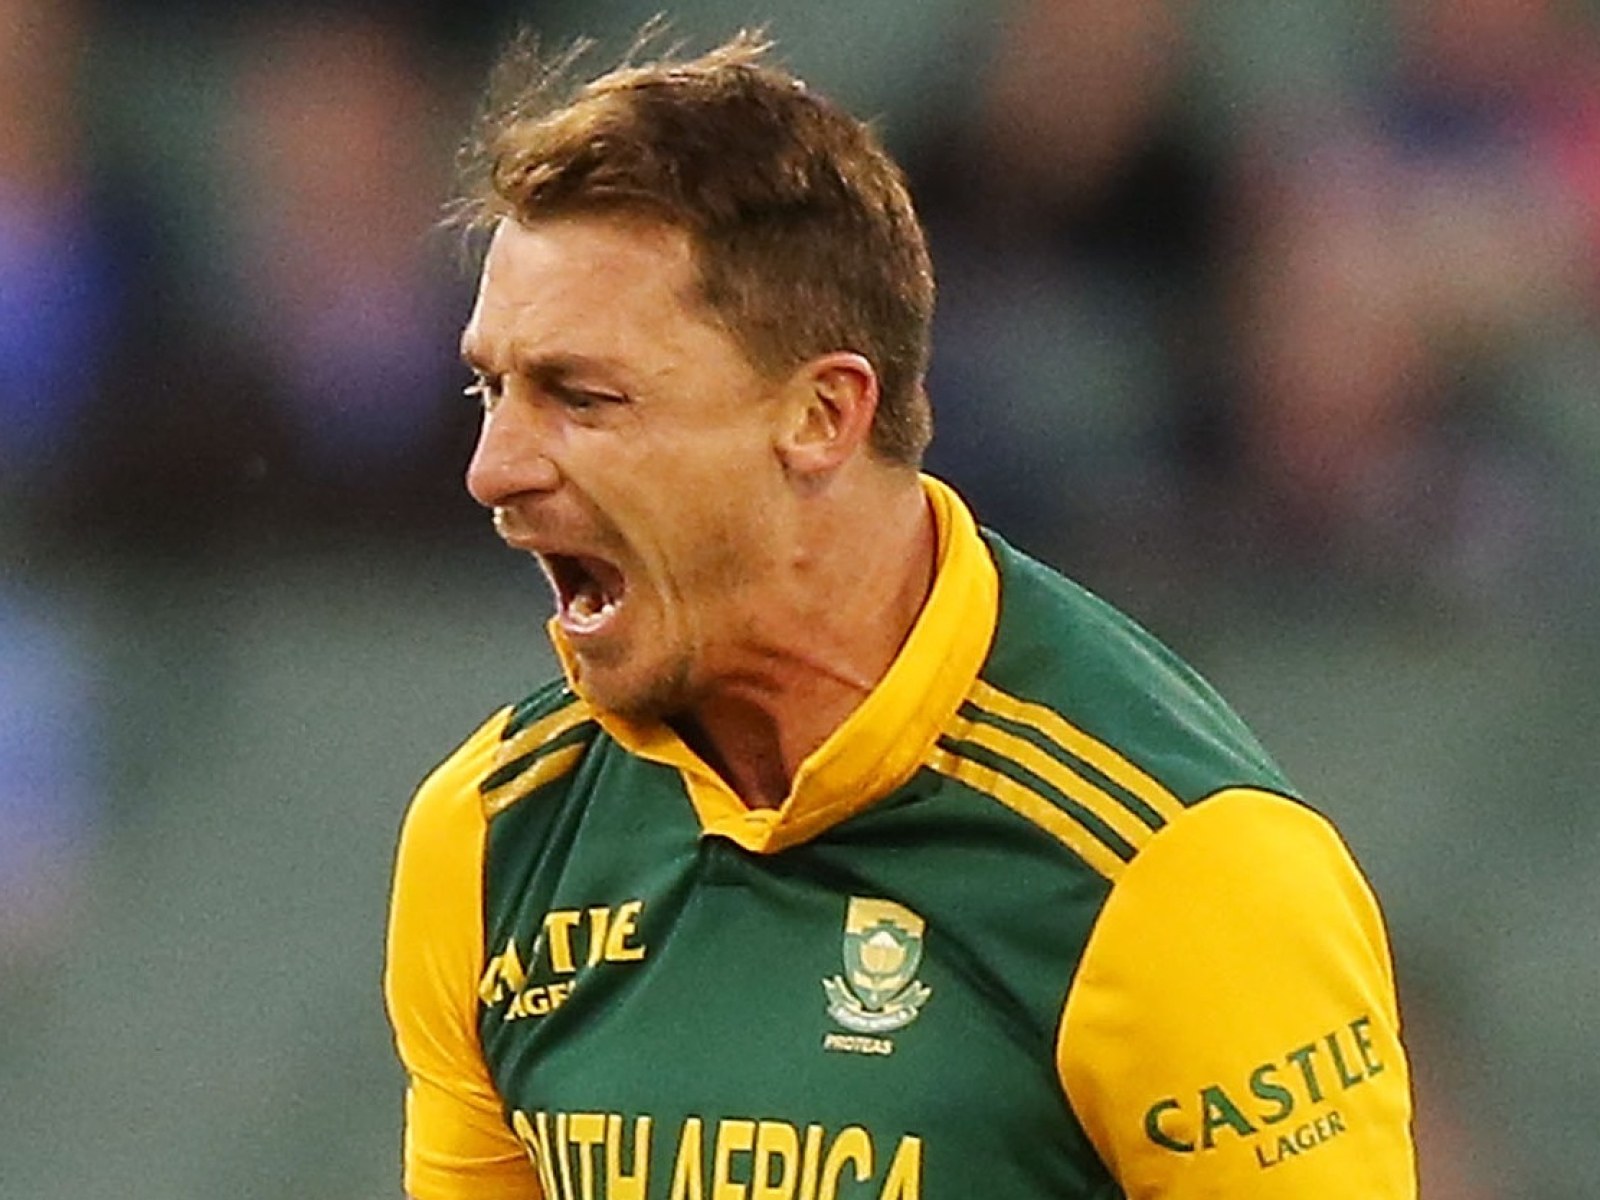 Cricket World Cup 2015 player to watch: Dale Steyn